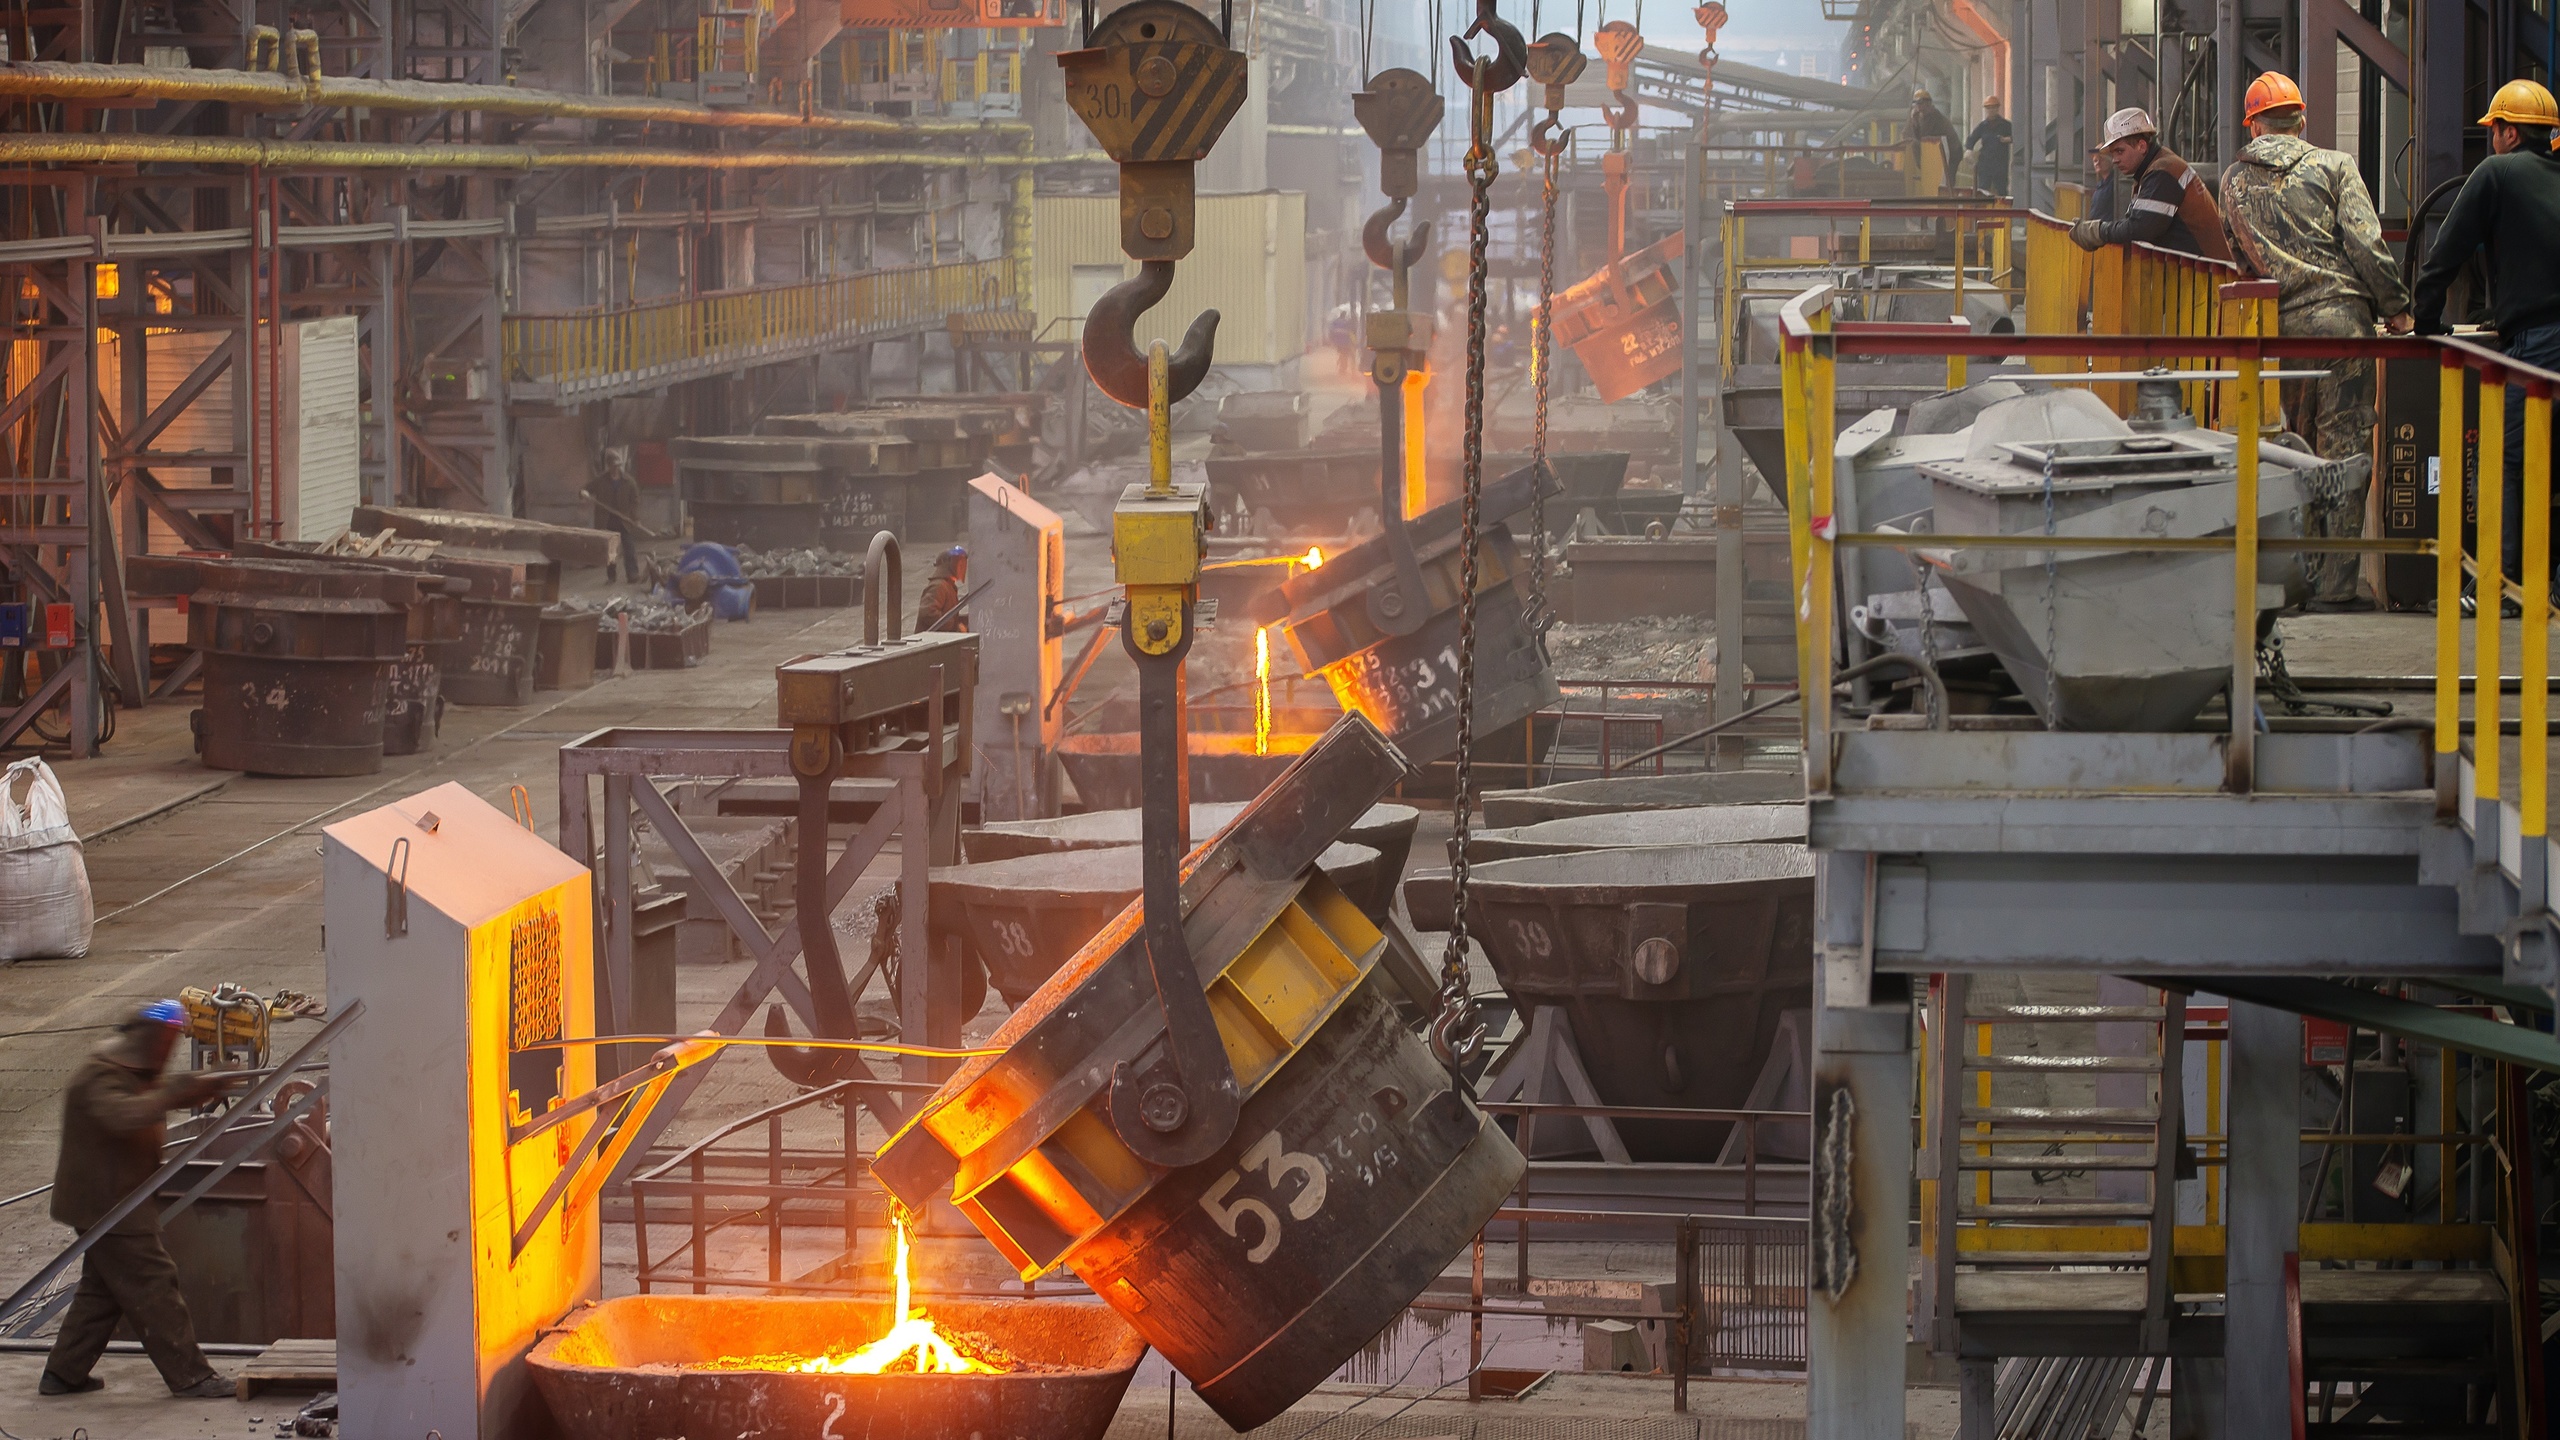 molten metals, machinery, foundry, industrial